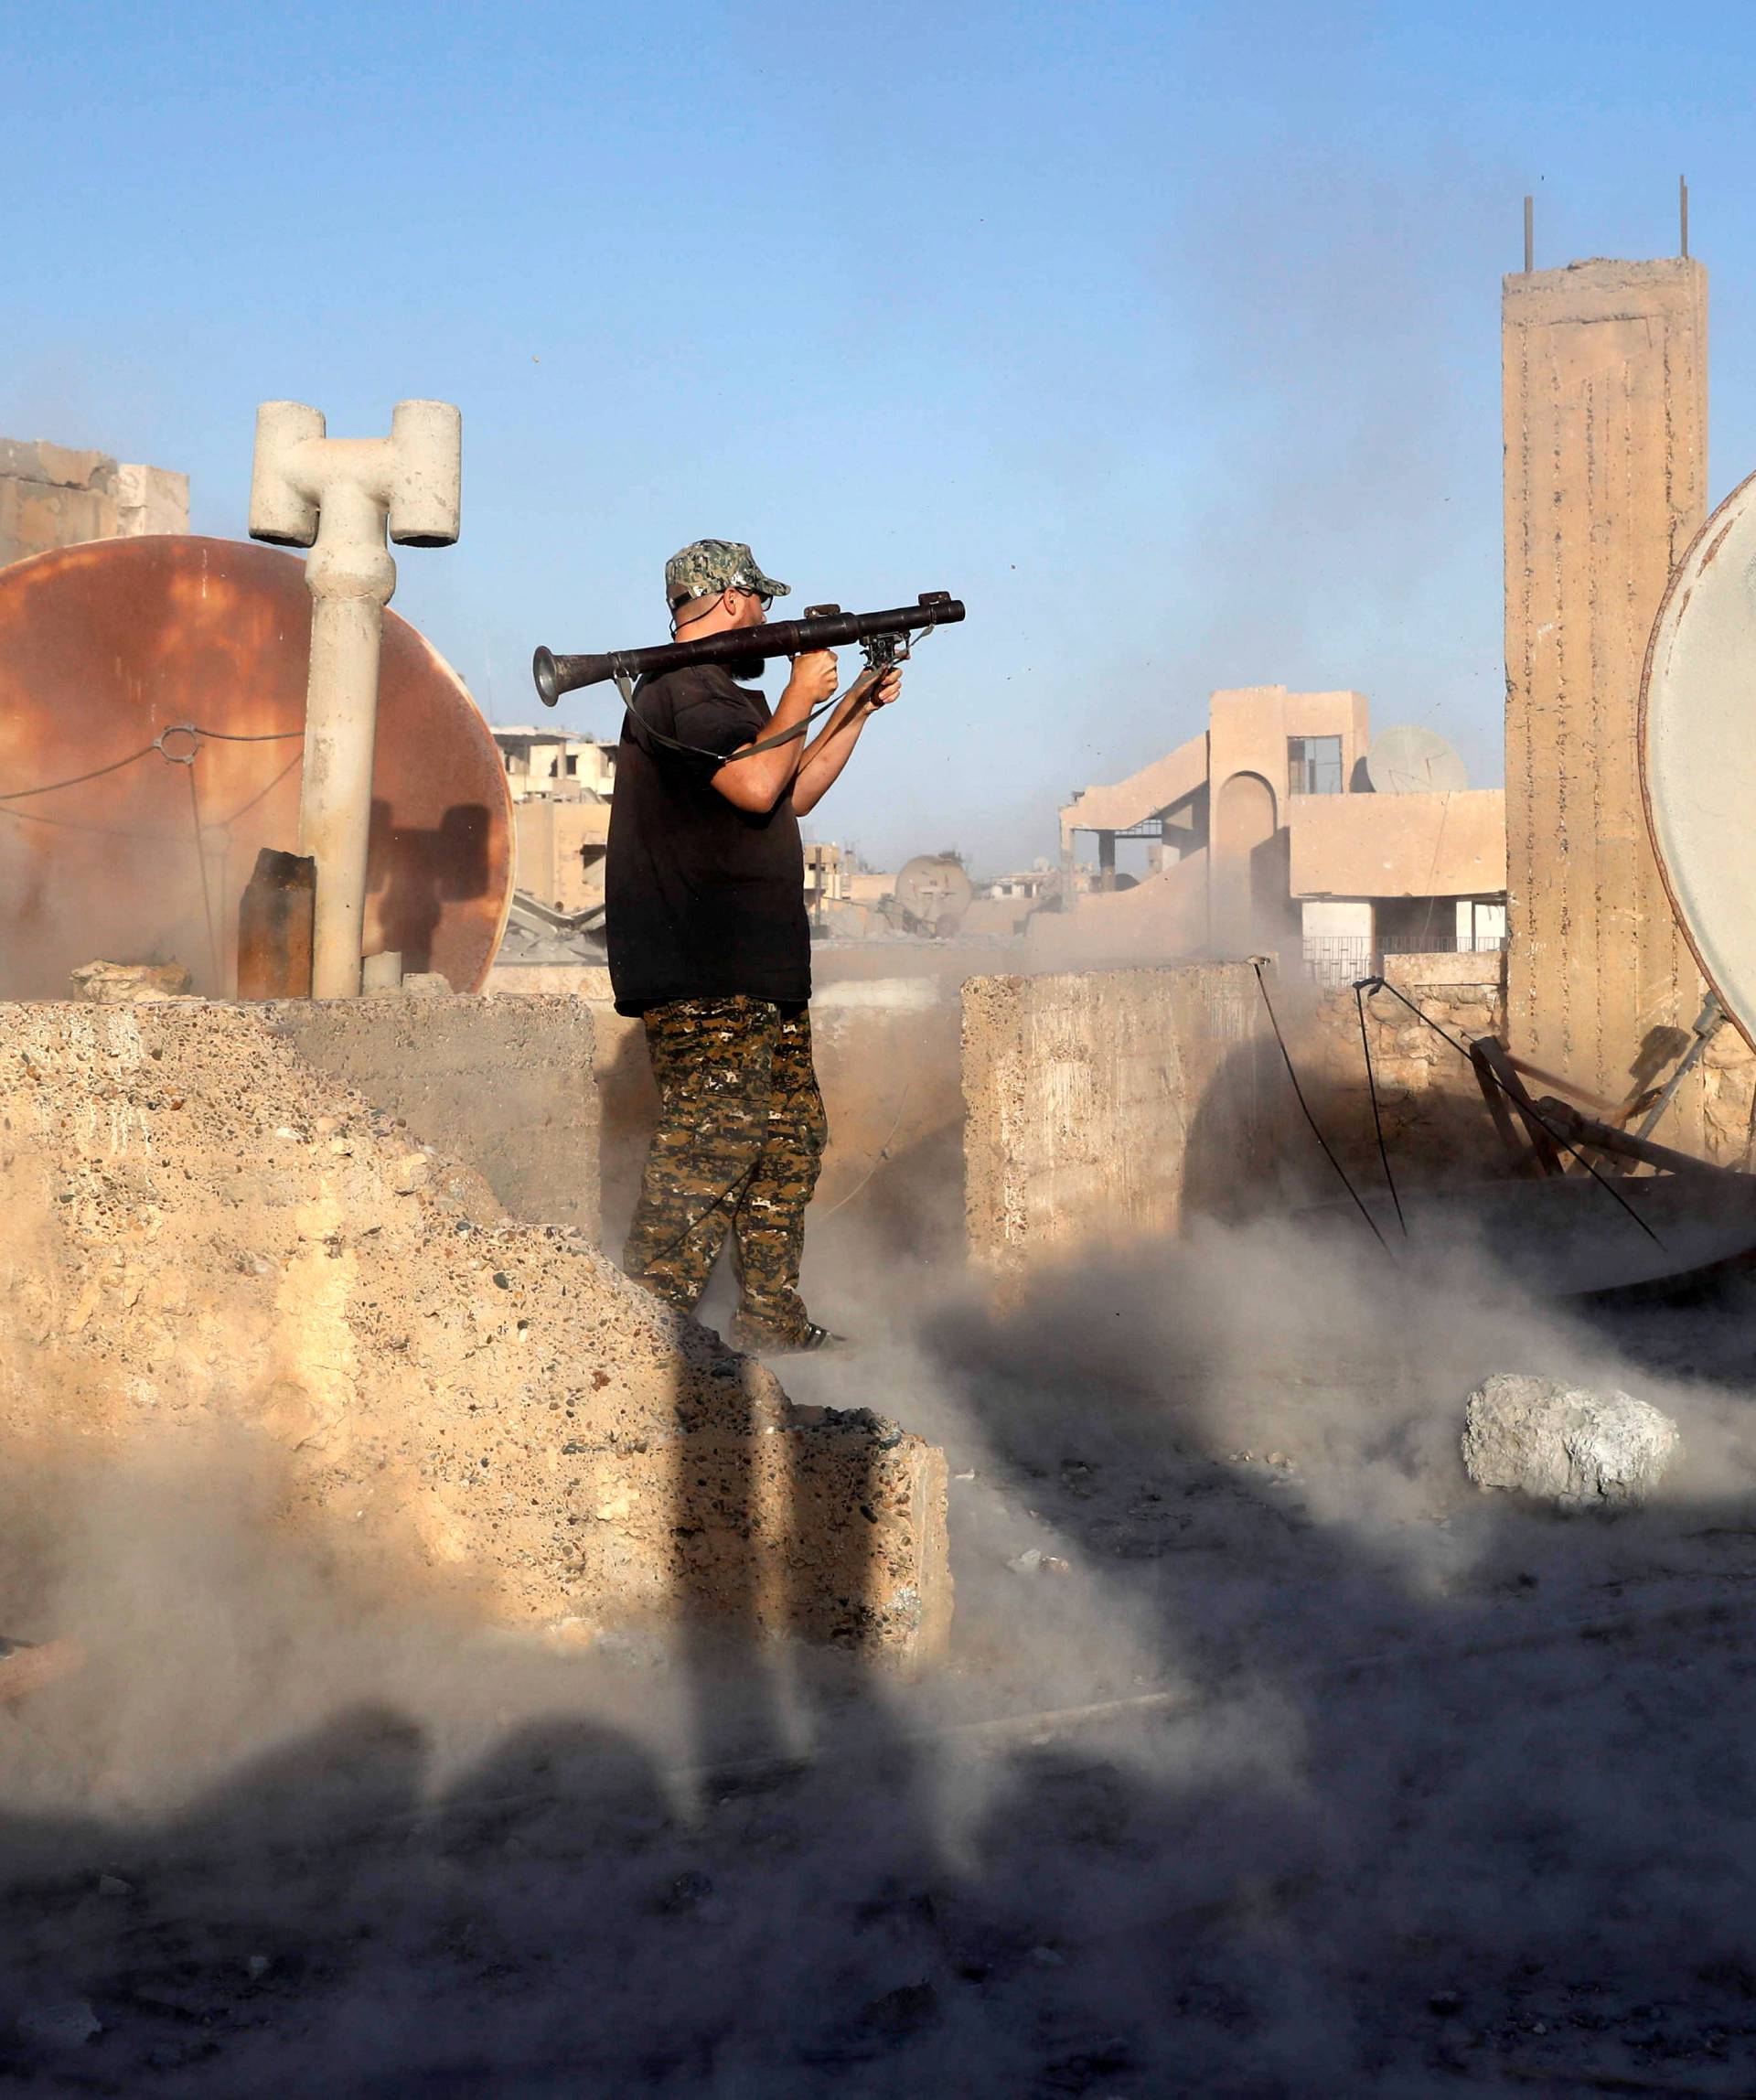 An American volunteer fighter of Syrian Democratic Forces fires an RPG during a battle with Islamic State militants at the frontline in Raqqa